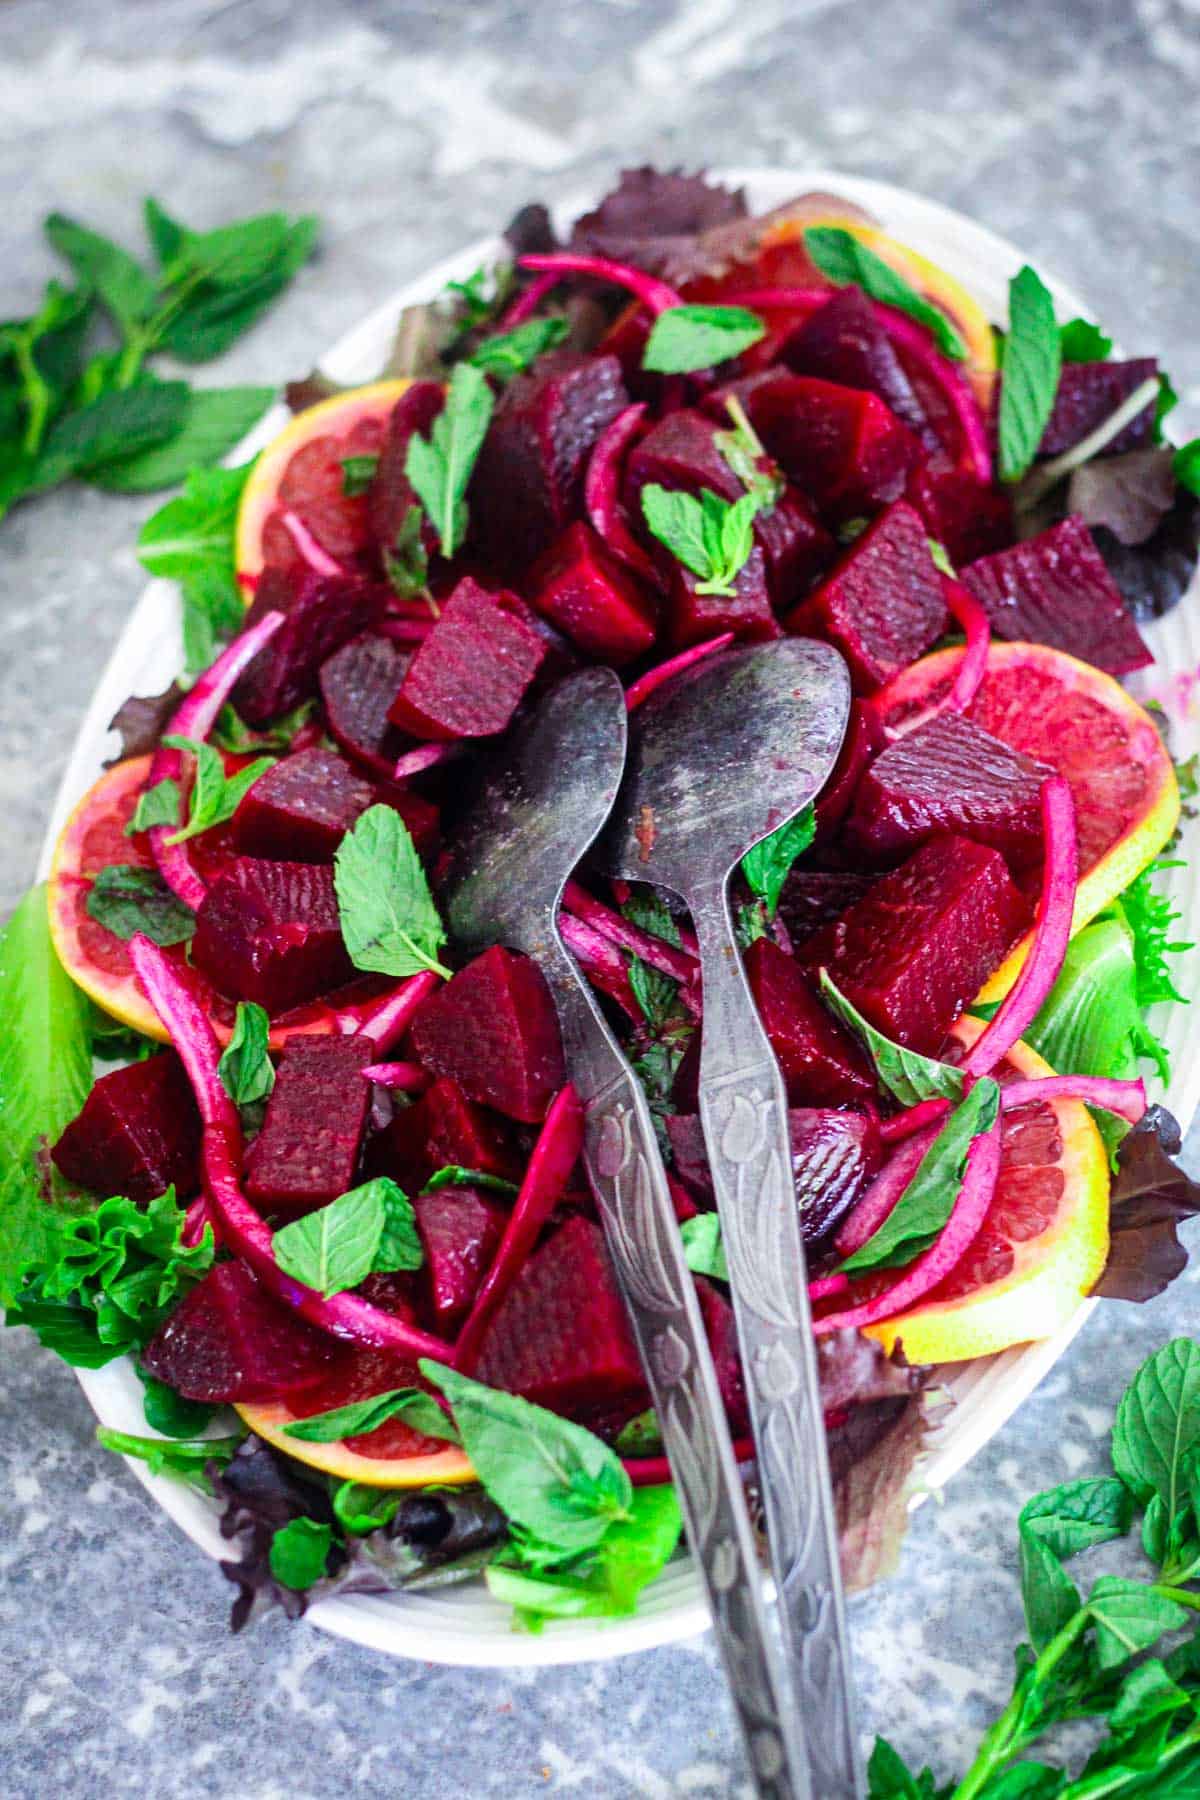 A platter with beets, mint, oranges and other ingredients making up a beautiful and vibrant salad.